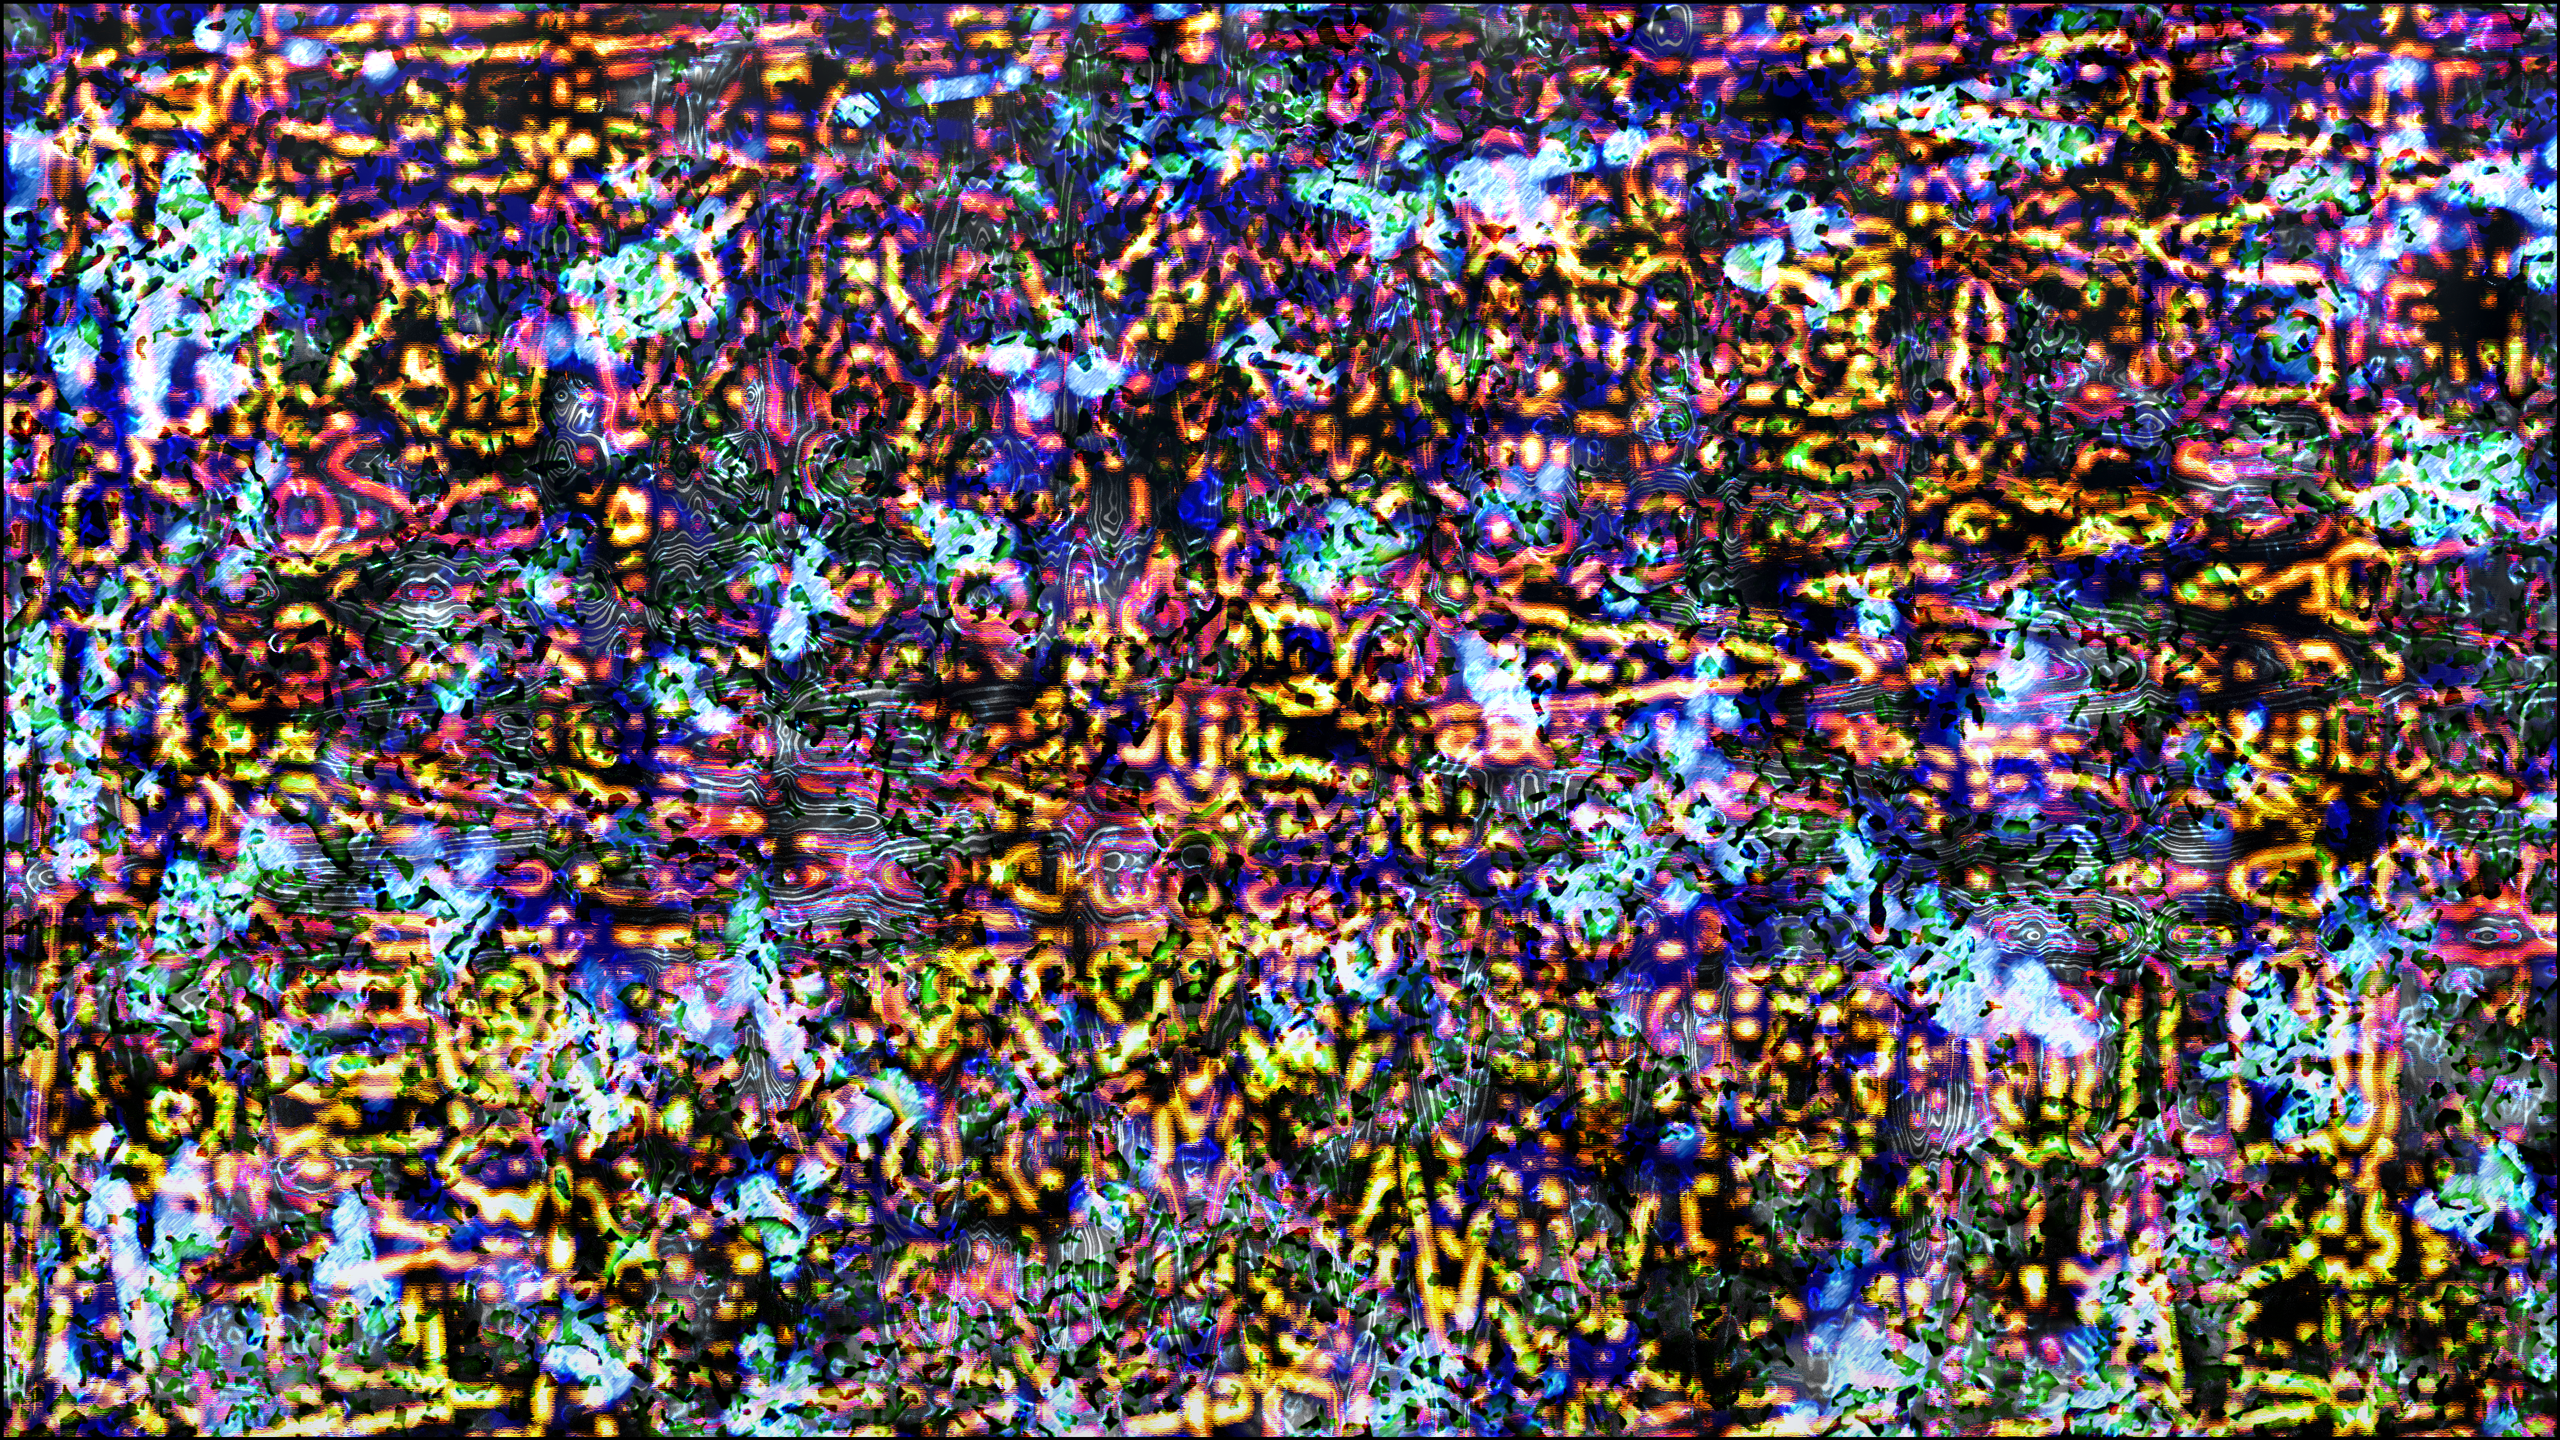 General 2560x1440 bright colorful abstract digital art